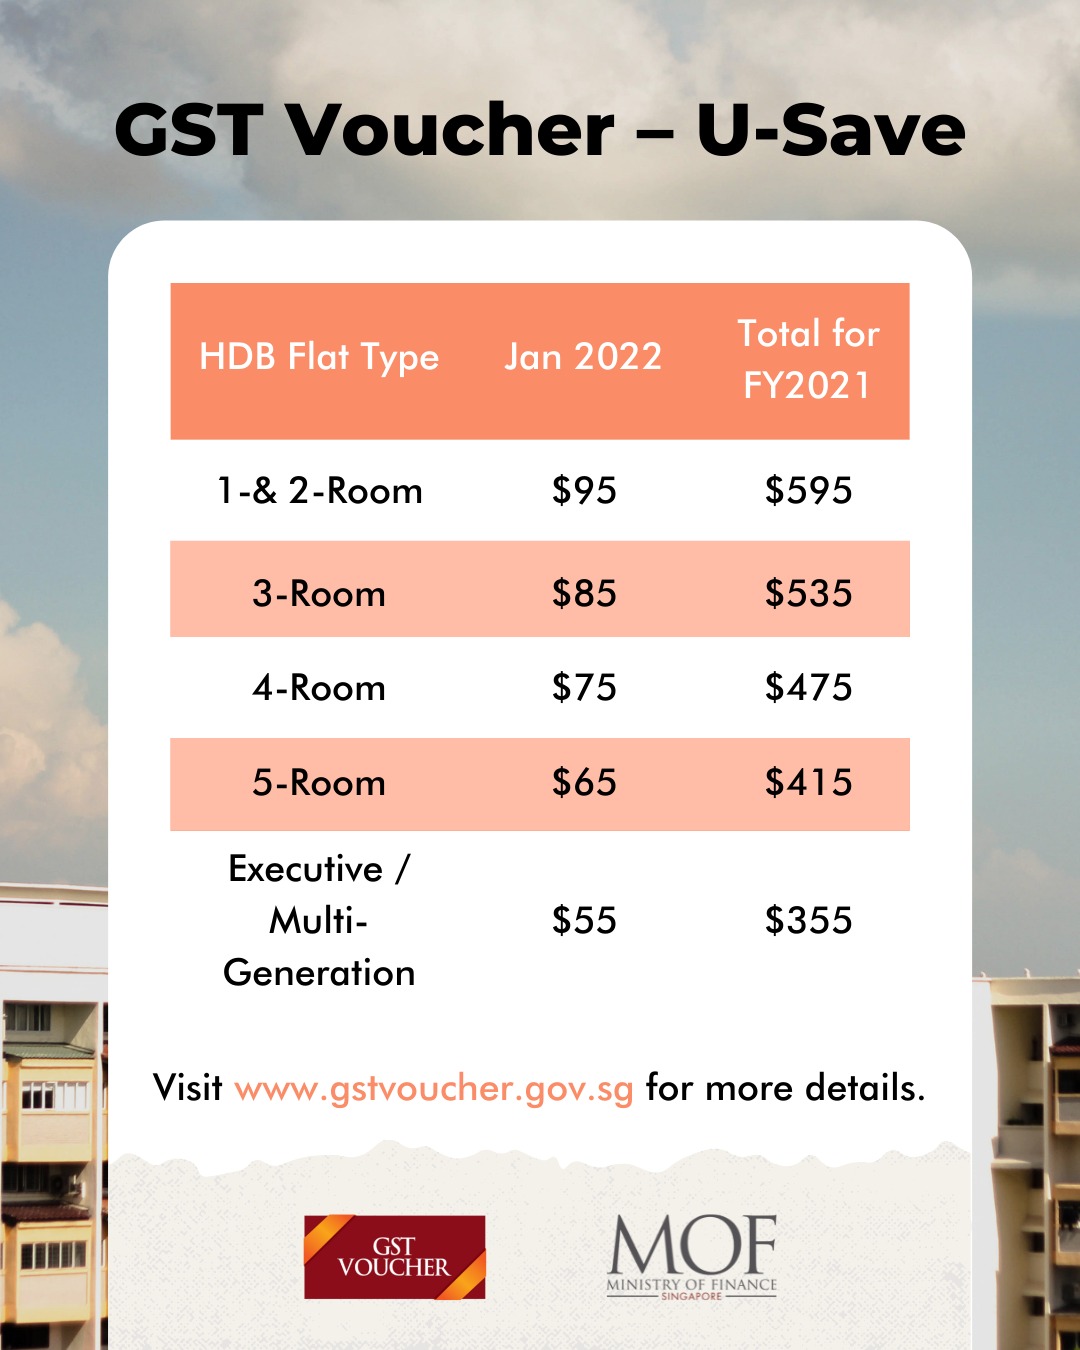 hdb-households-will-get-up-to-95-gst-u-save-vouchers-in-jan-to-offset